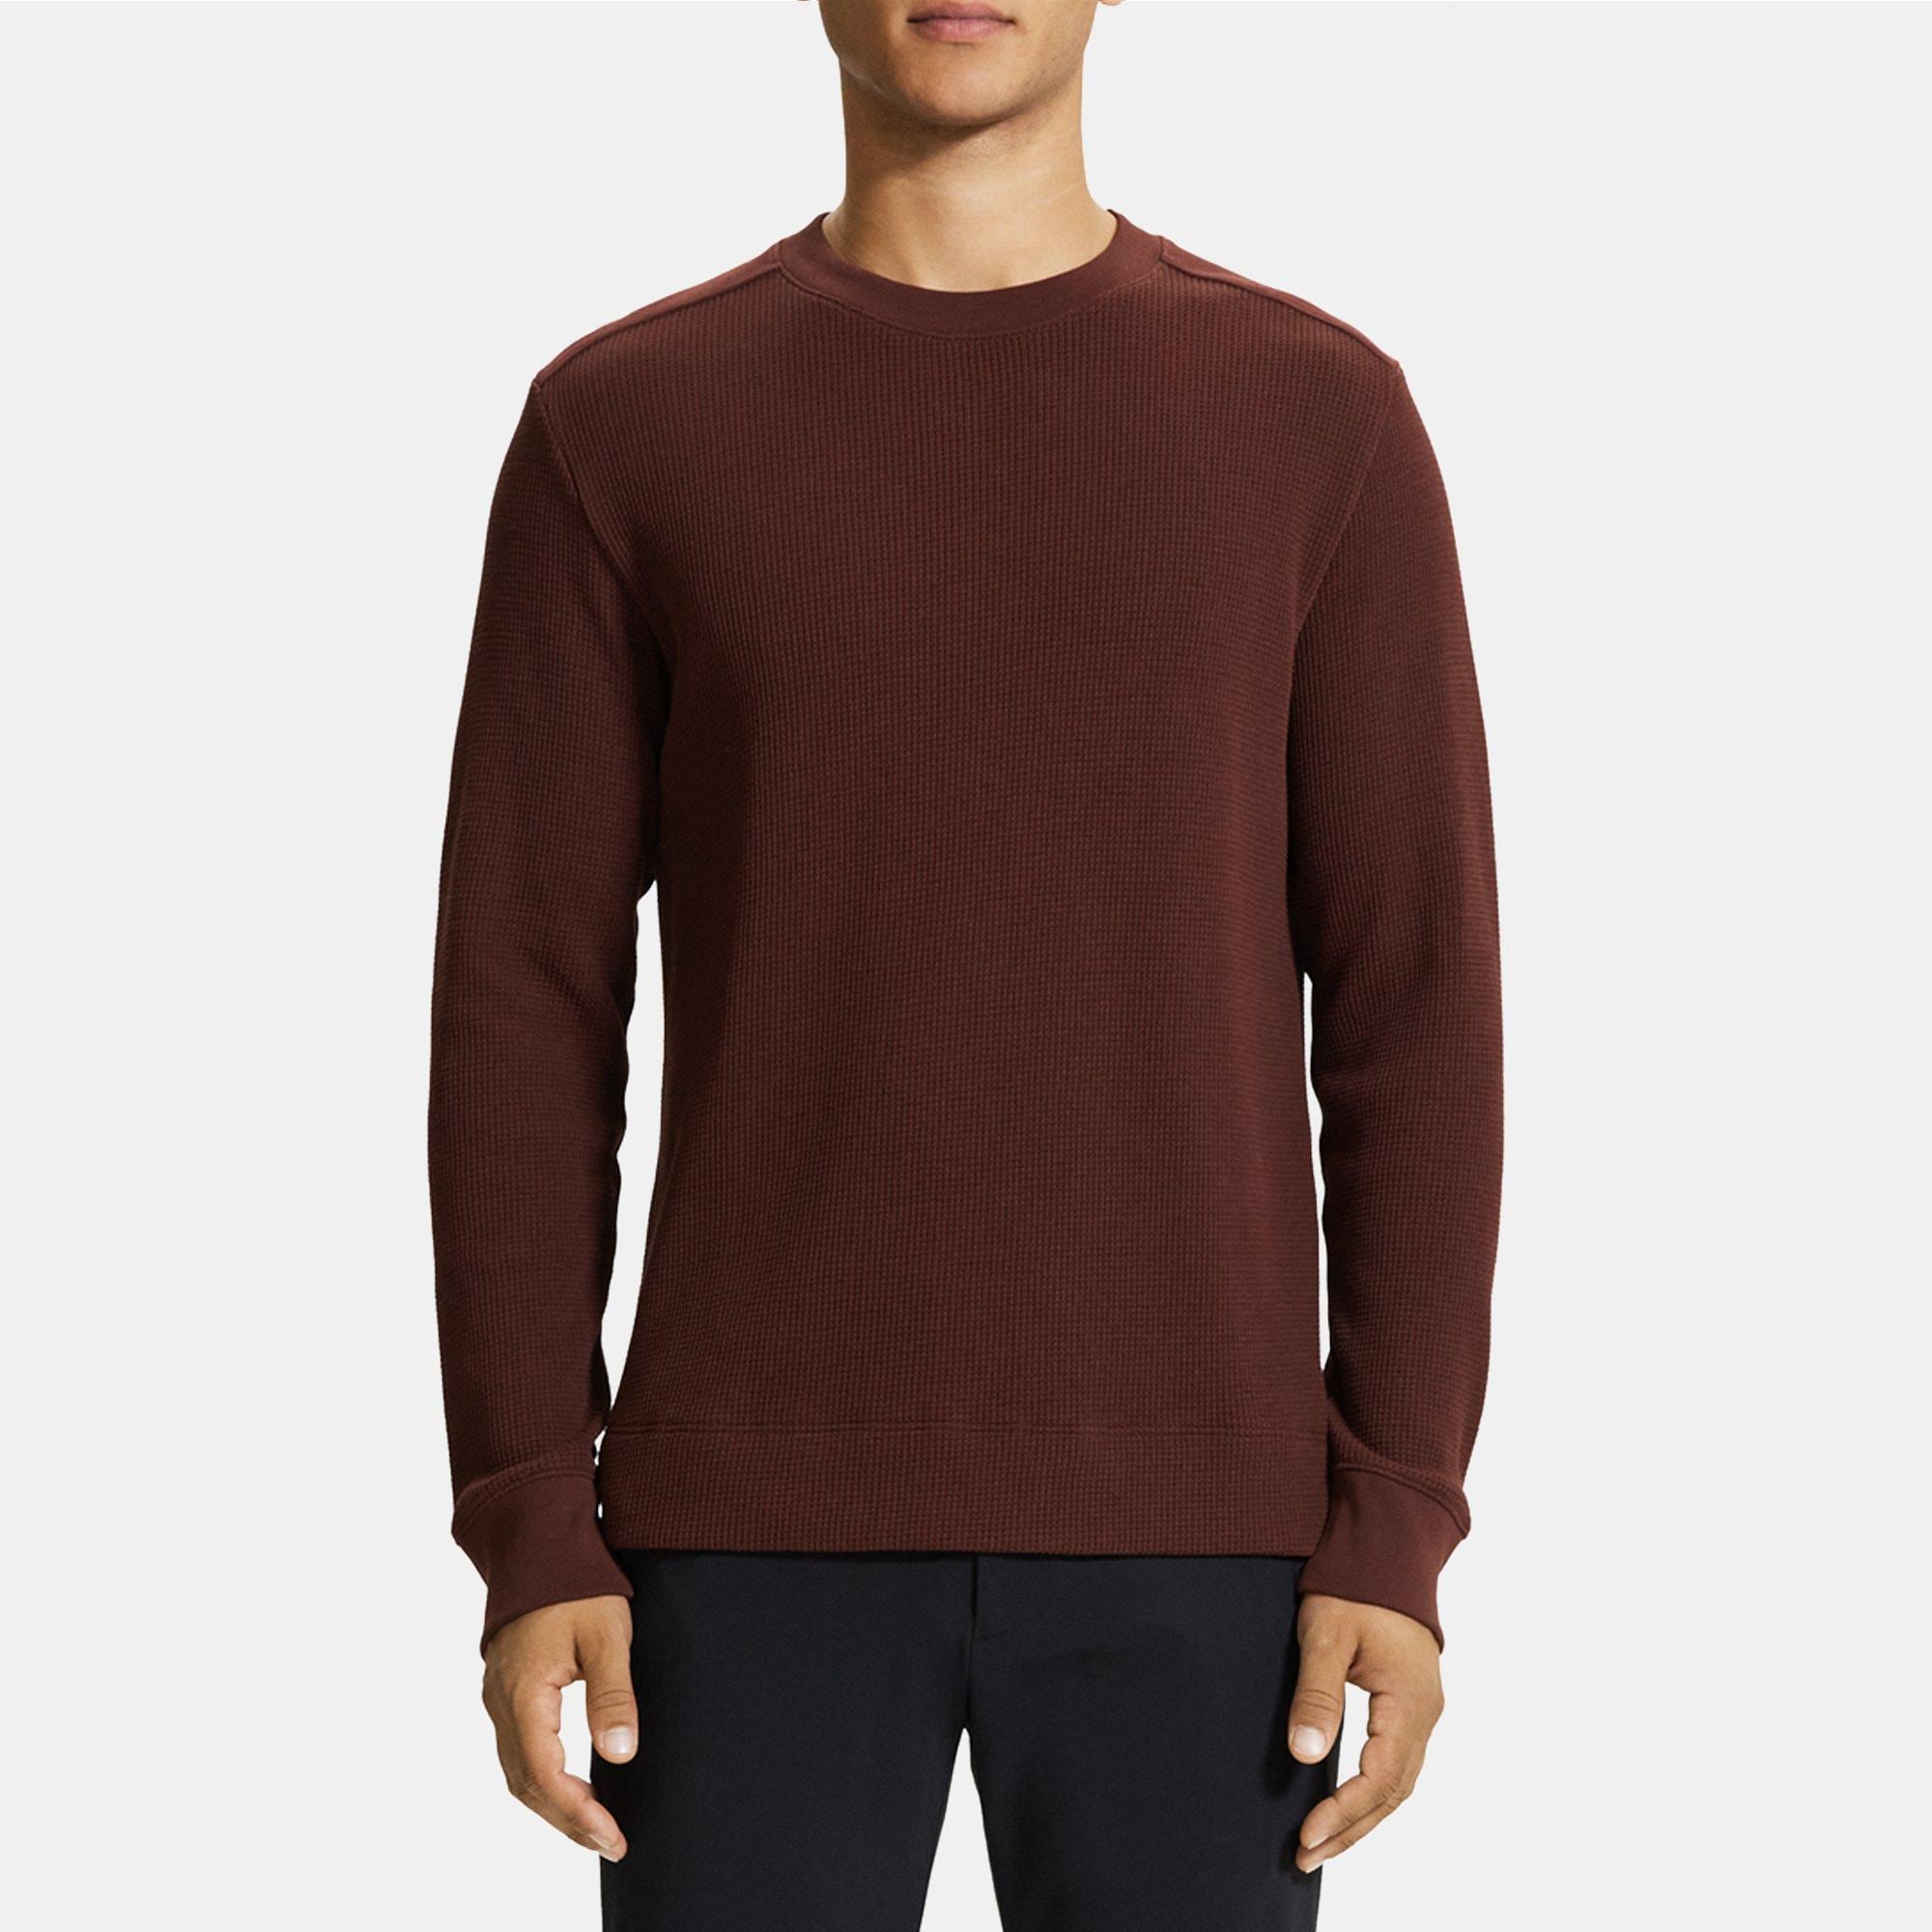 Theory Crewneck Sweater in Cotton Waffle Knit